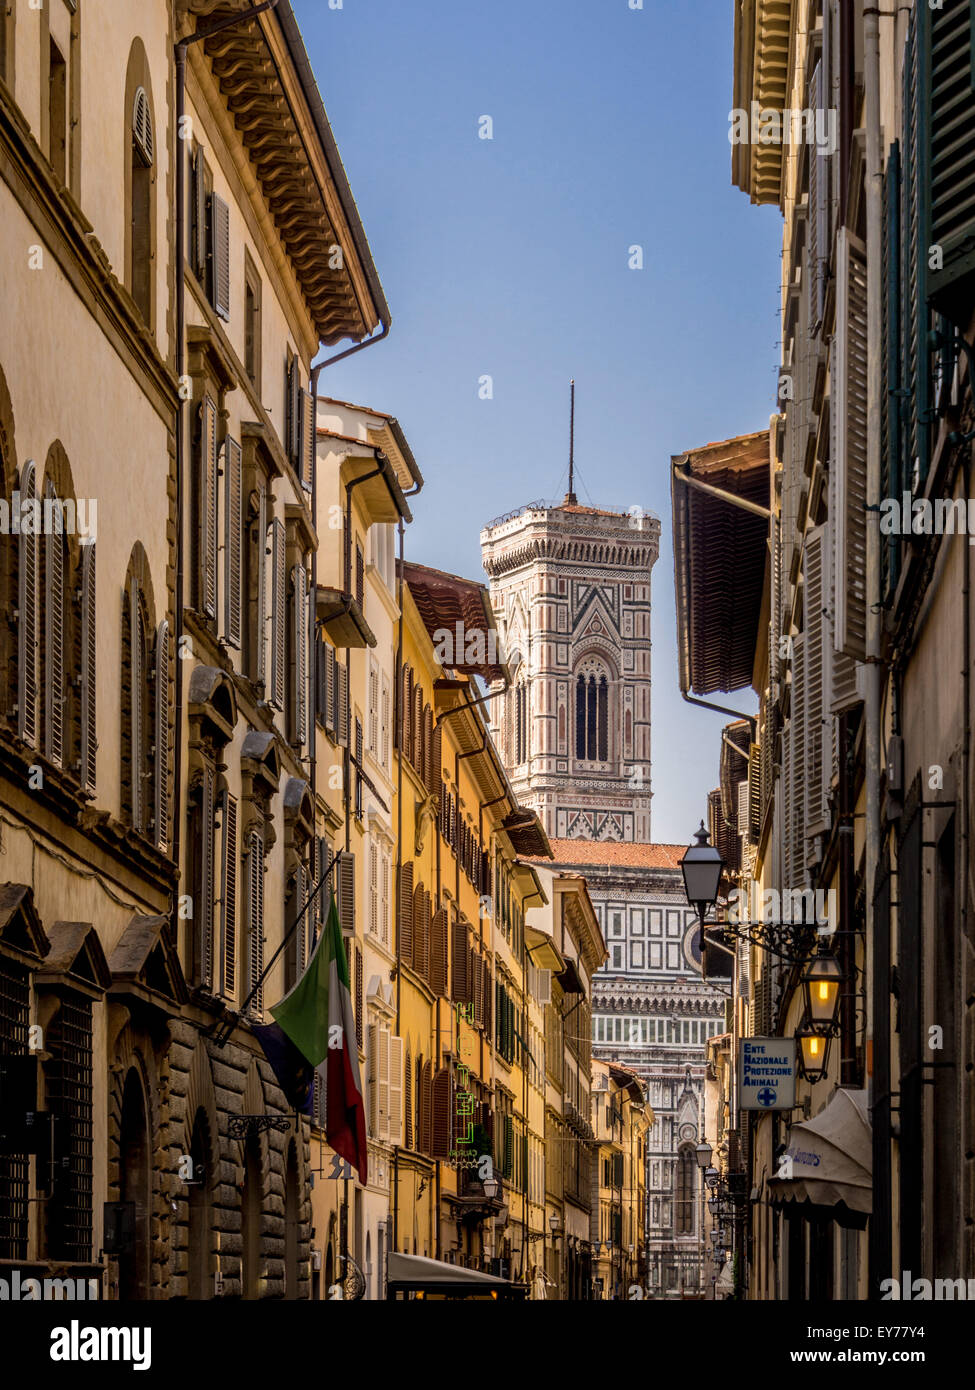 Giotto's Campanile glimpsed between buildings in the city of Florence, Italy. Stock Photo